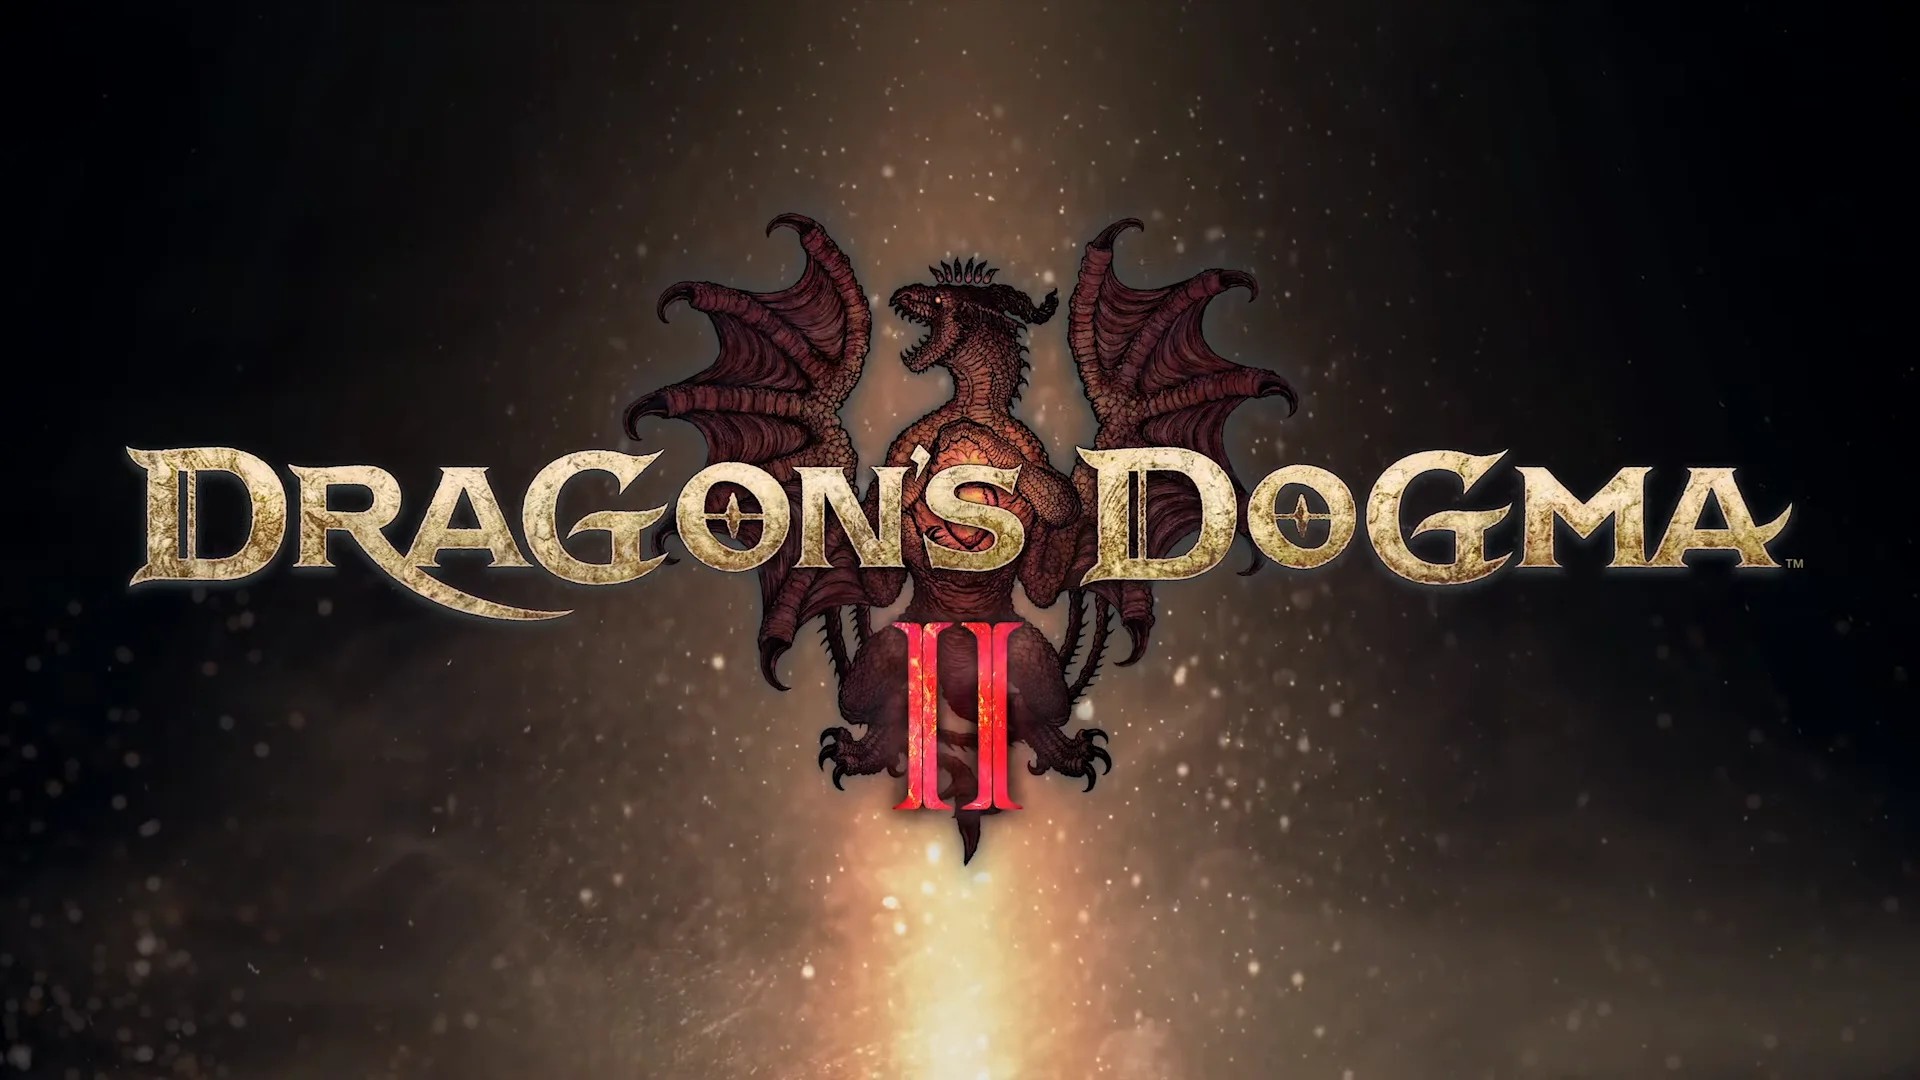 Dragon's Dogma 2 has been criticized on Steam for microtransactions and other problems